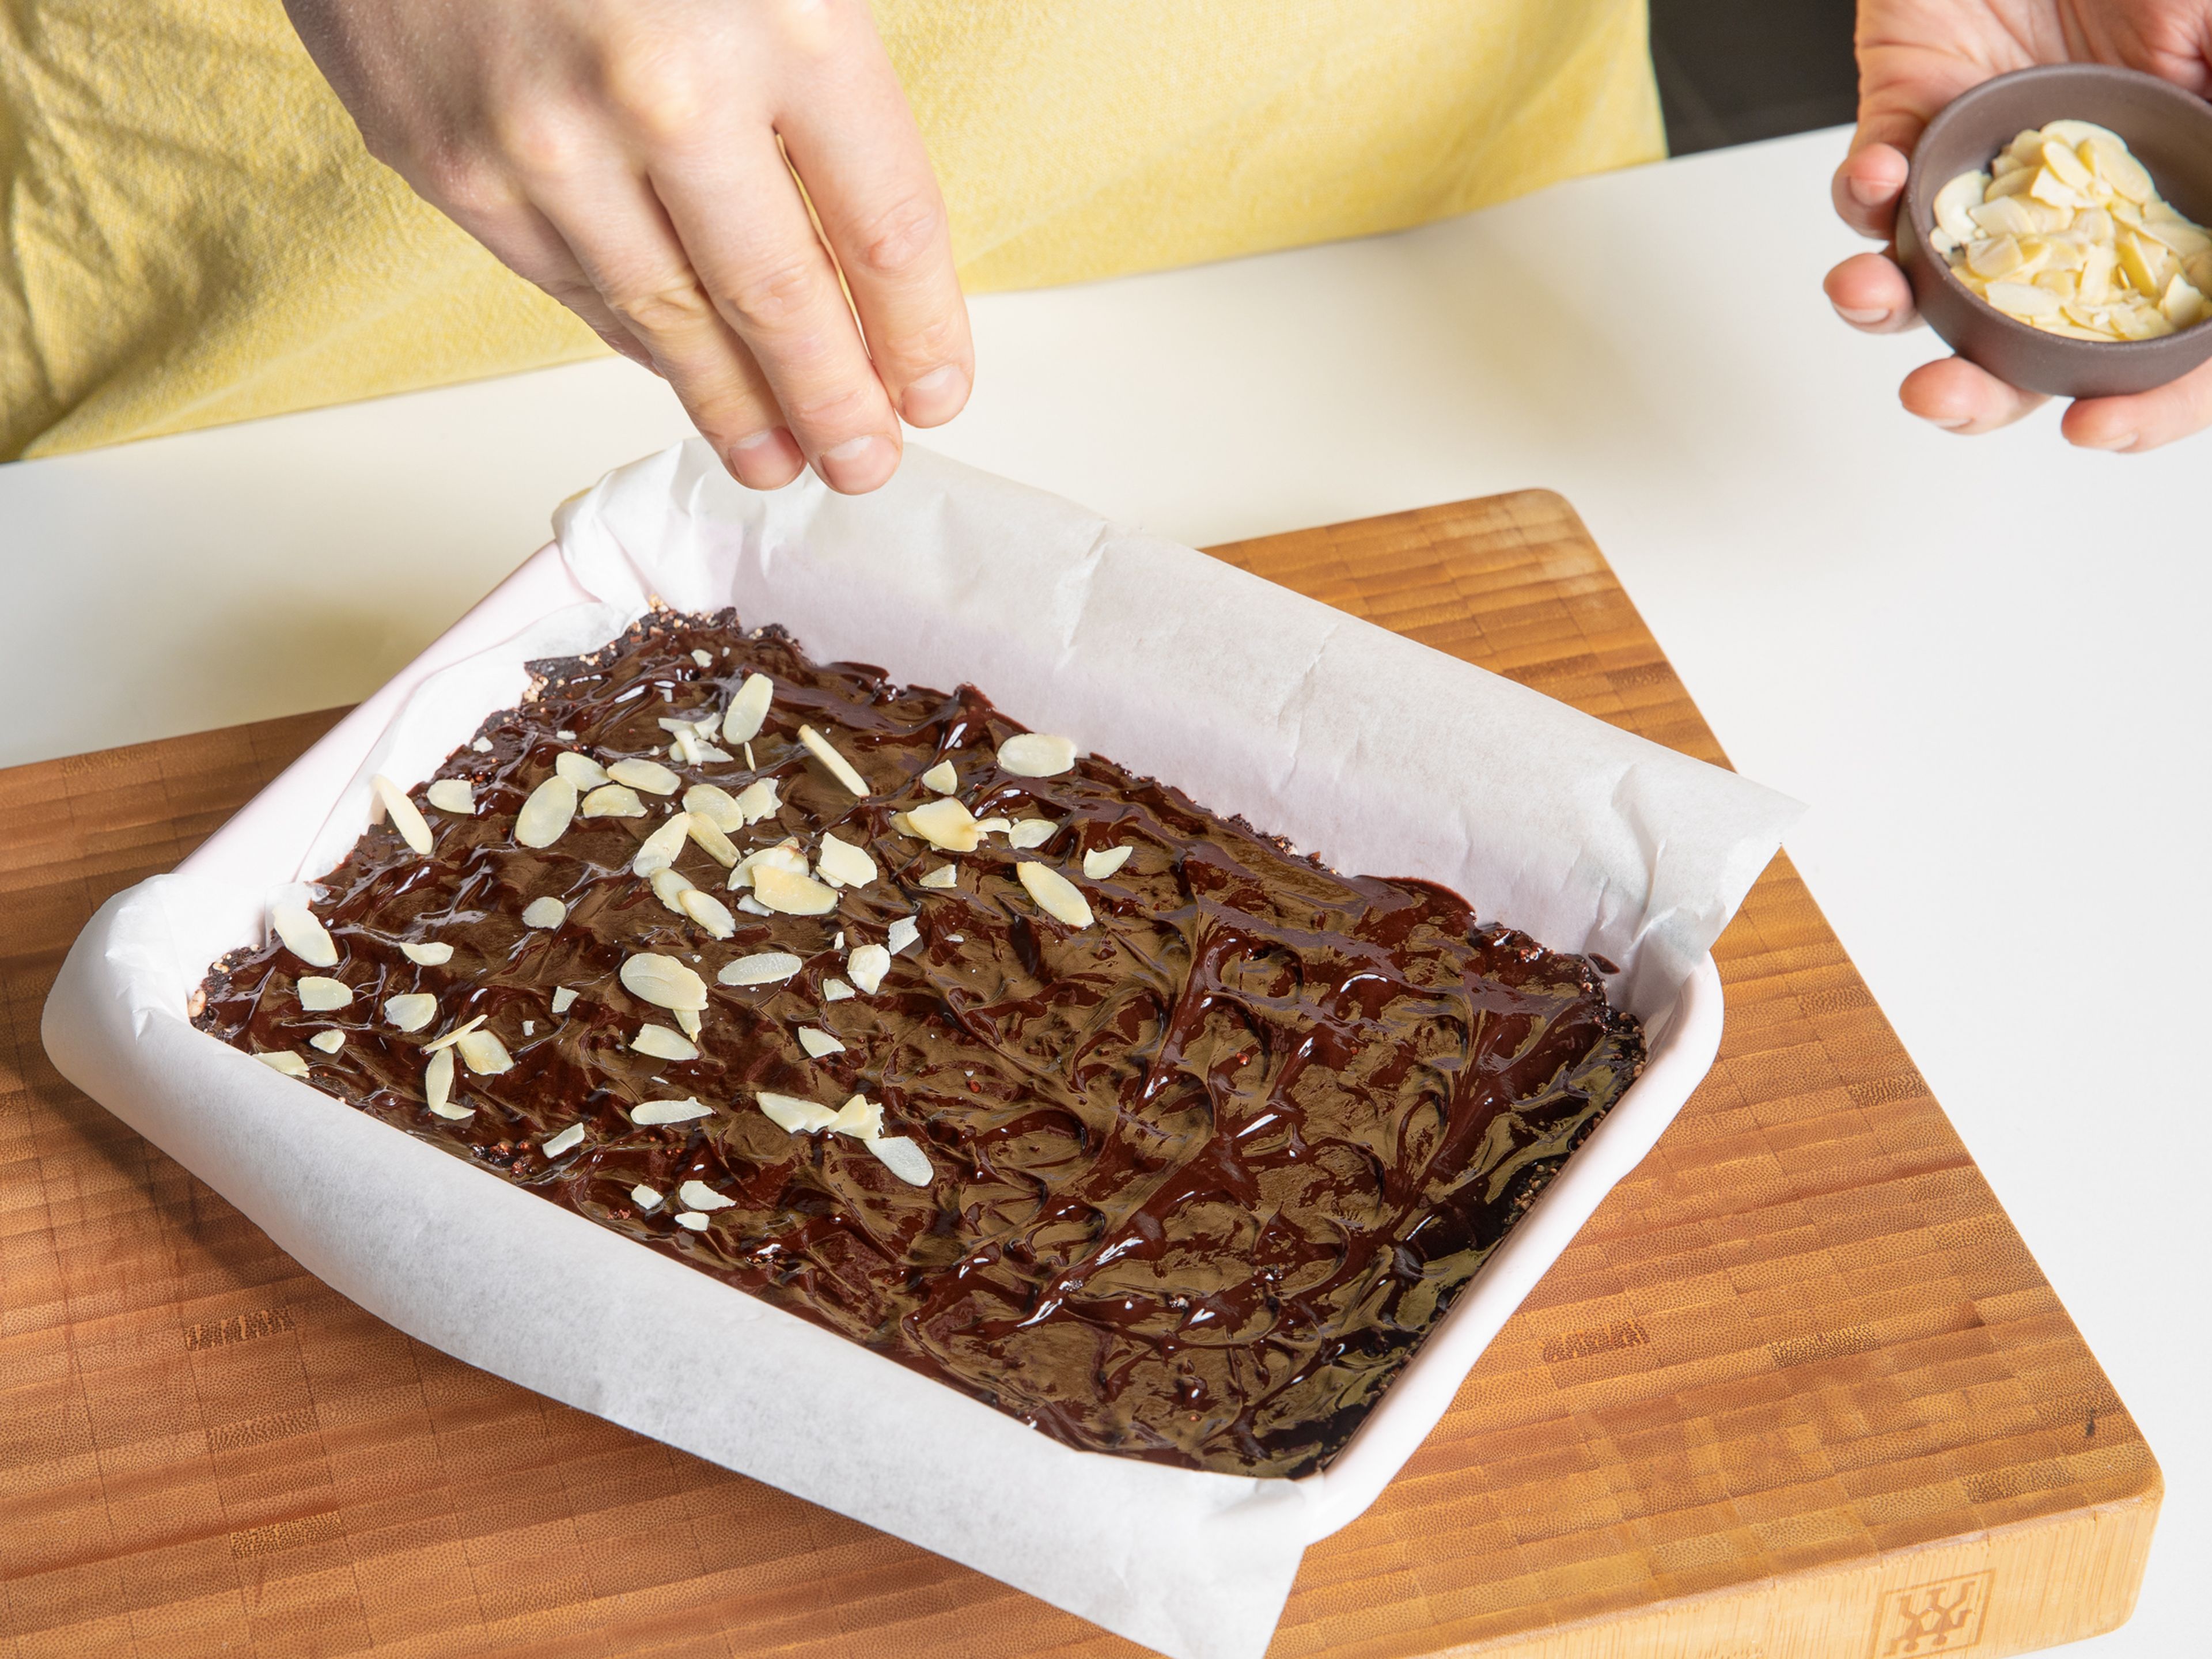 Spread the glaze on the brownies and sprinkle with almond slices. Transfer to the refrigerator to chill for approx. 1 hr., then cut into pieces. Enjoy!